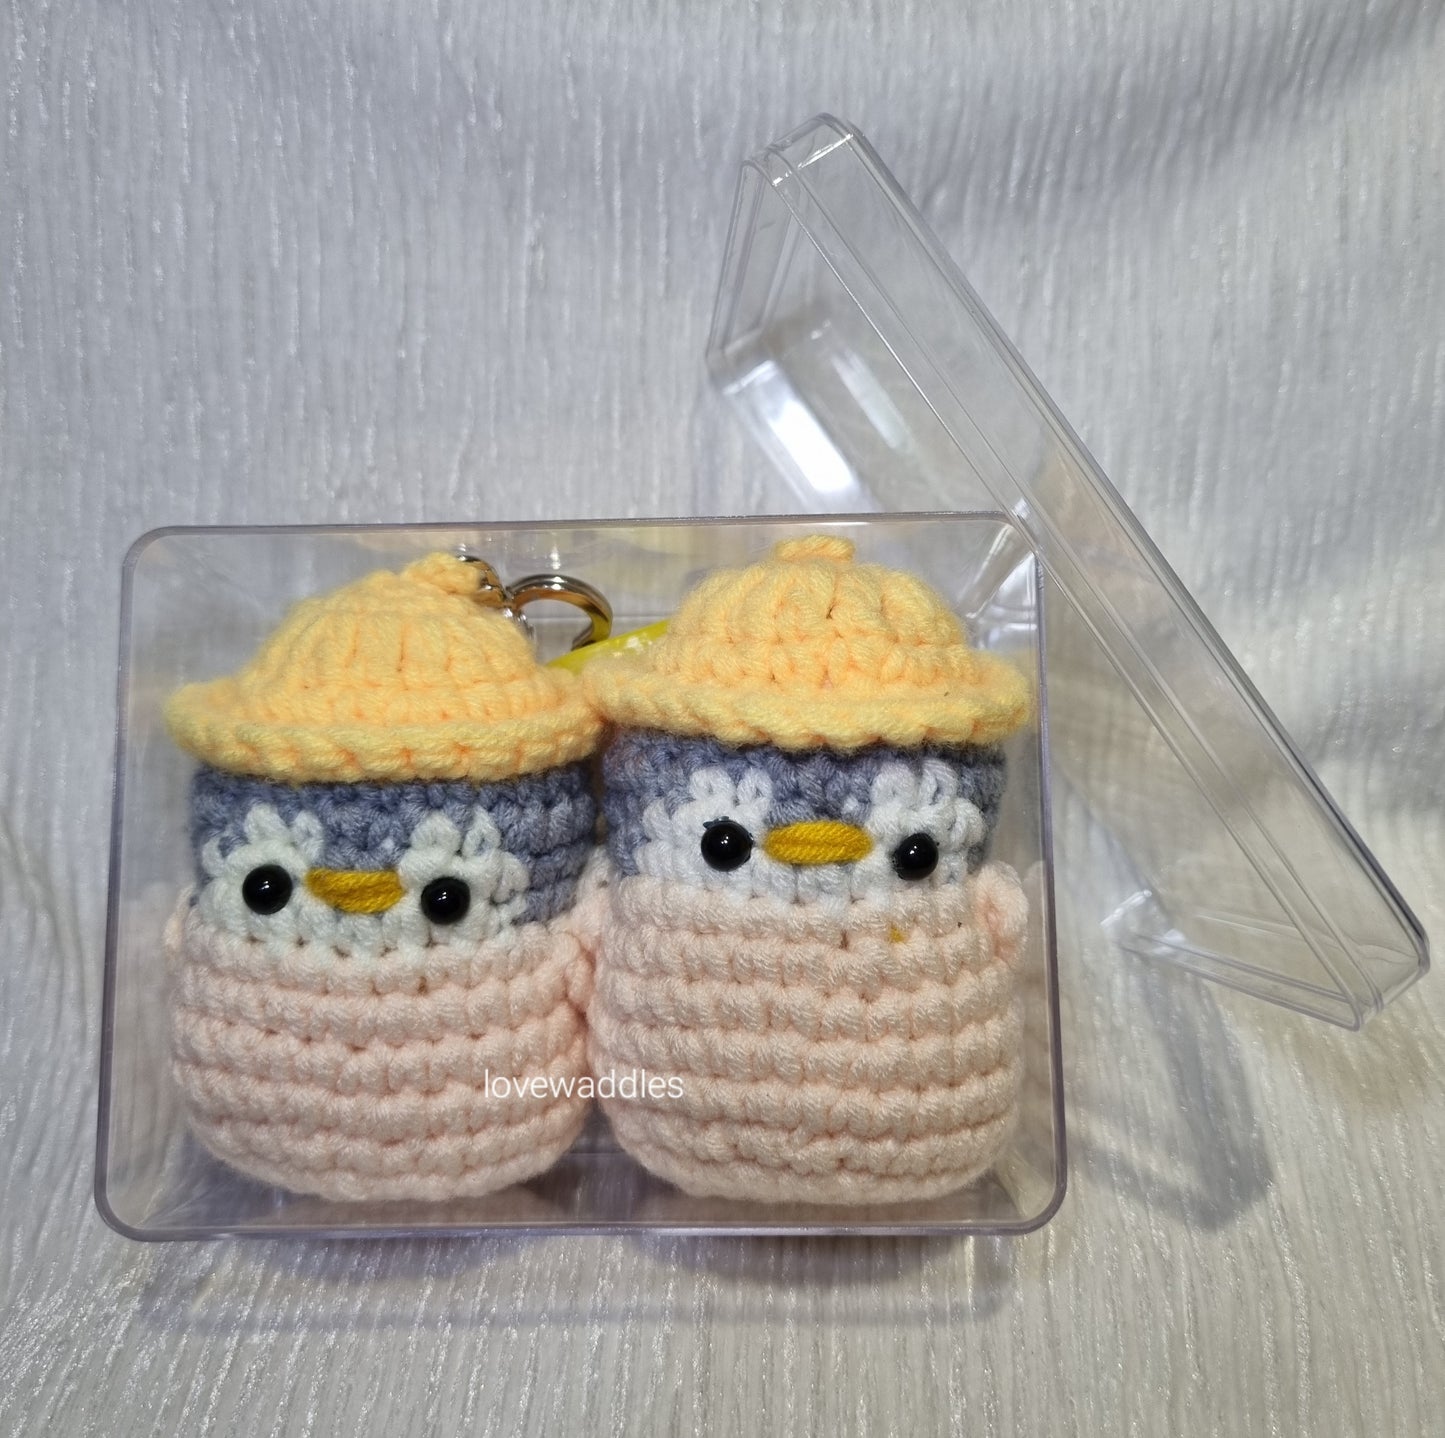 2 crochet penguin with keychains and 1 acrylic box